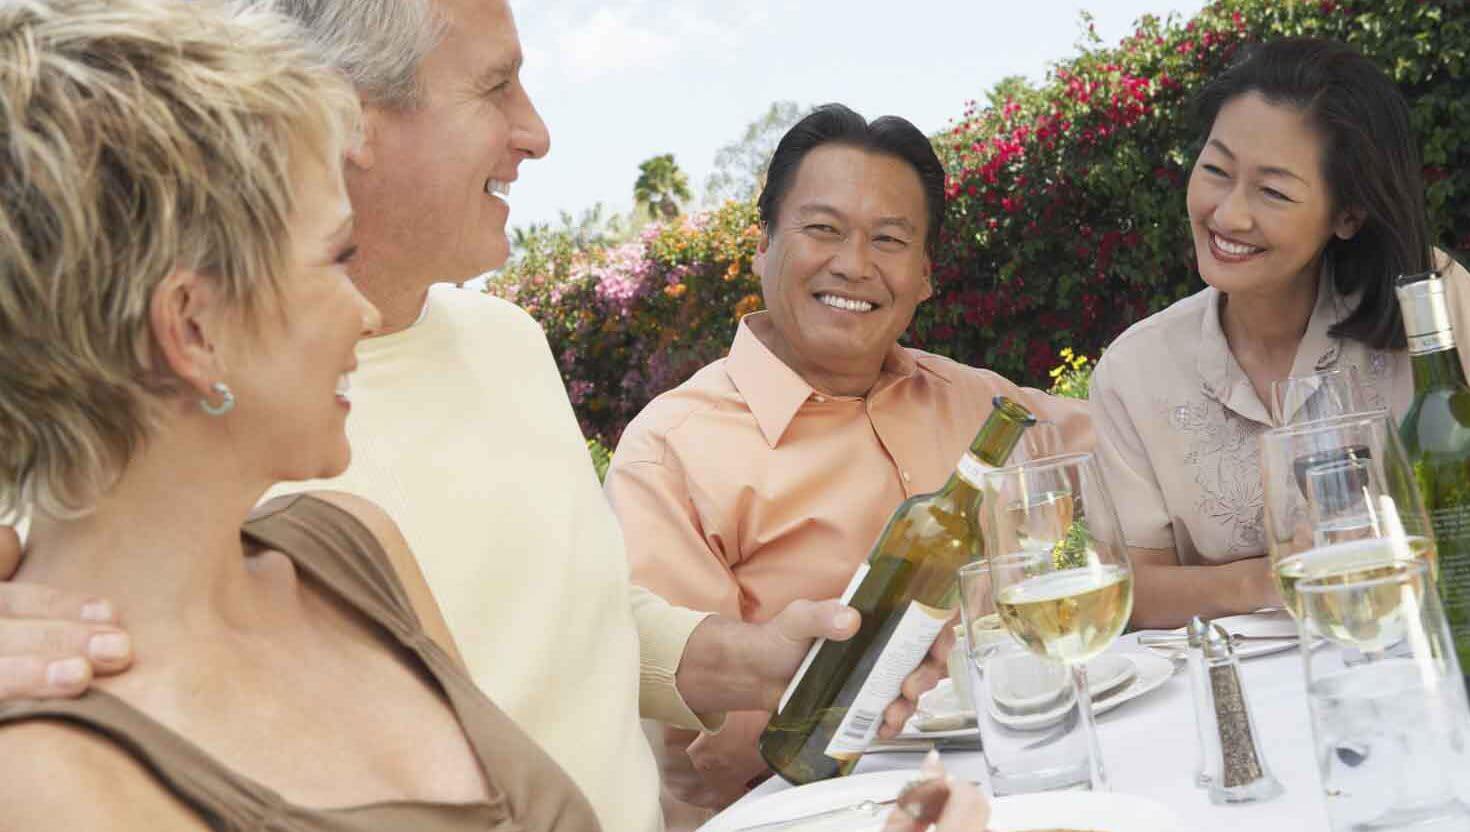 A group of persons smiling while drinking wine on a sunny day